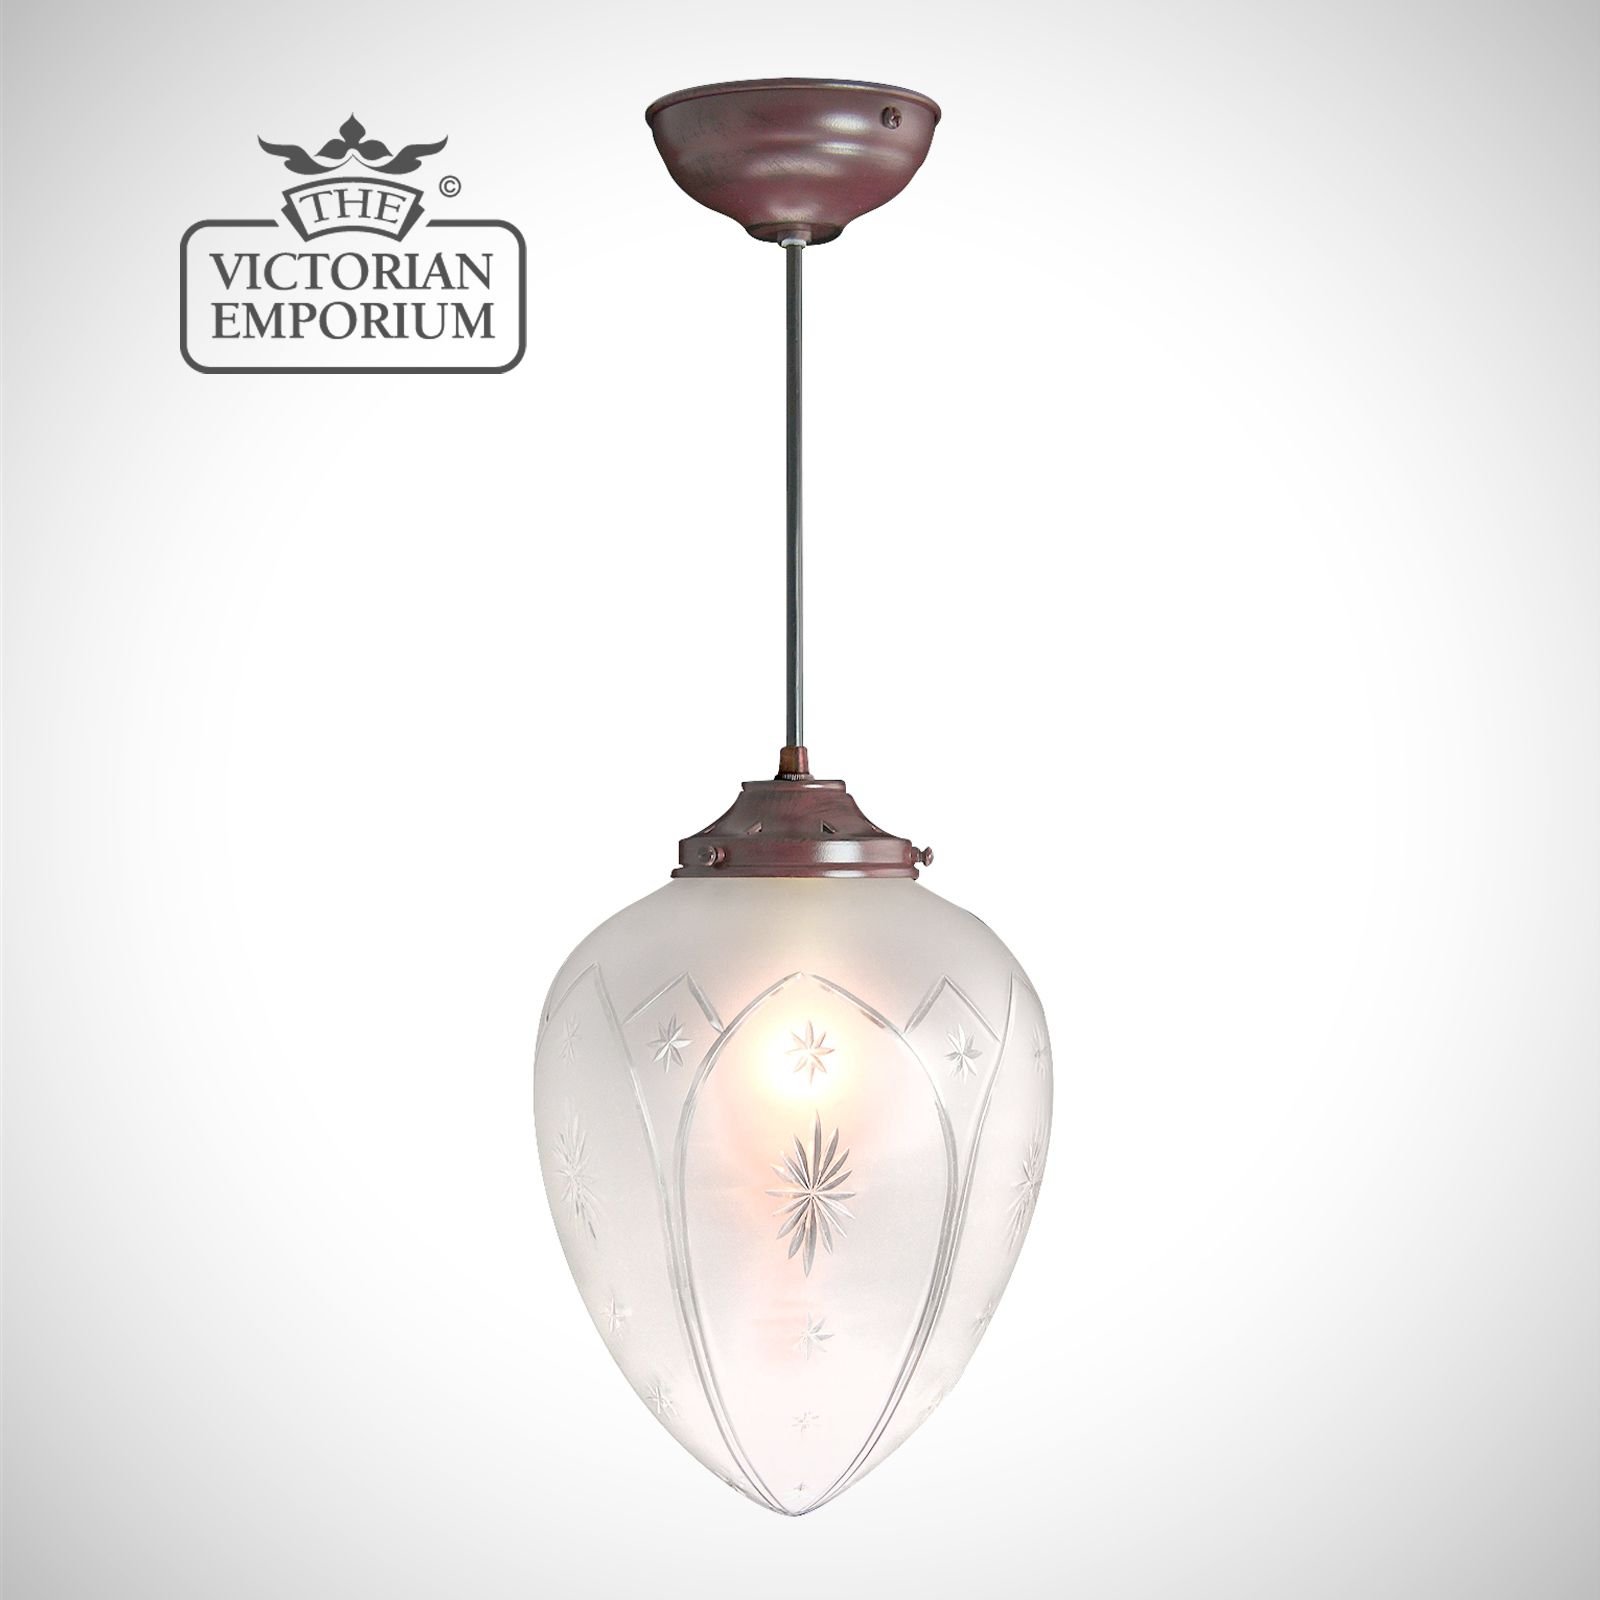 Star Cut Glass Ceiling Pendant -  featuring hand blown, acorn shaped etched shade in a traditional antique bronze finish